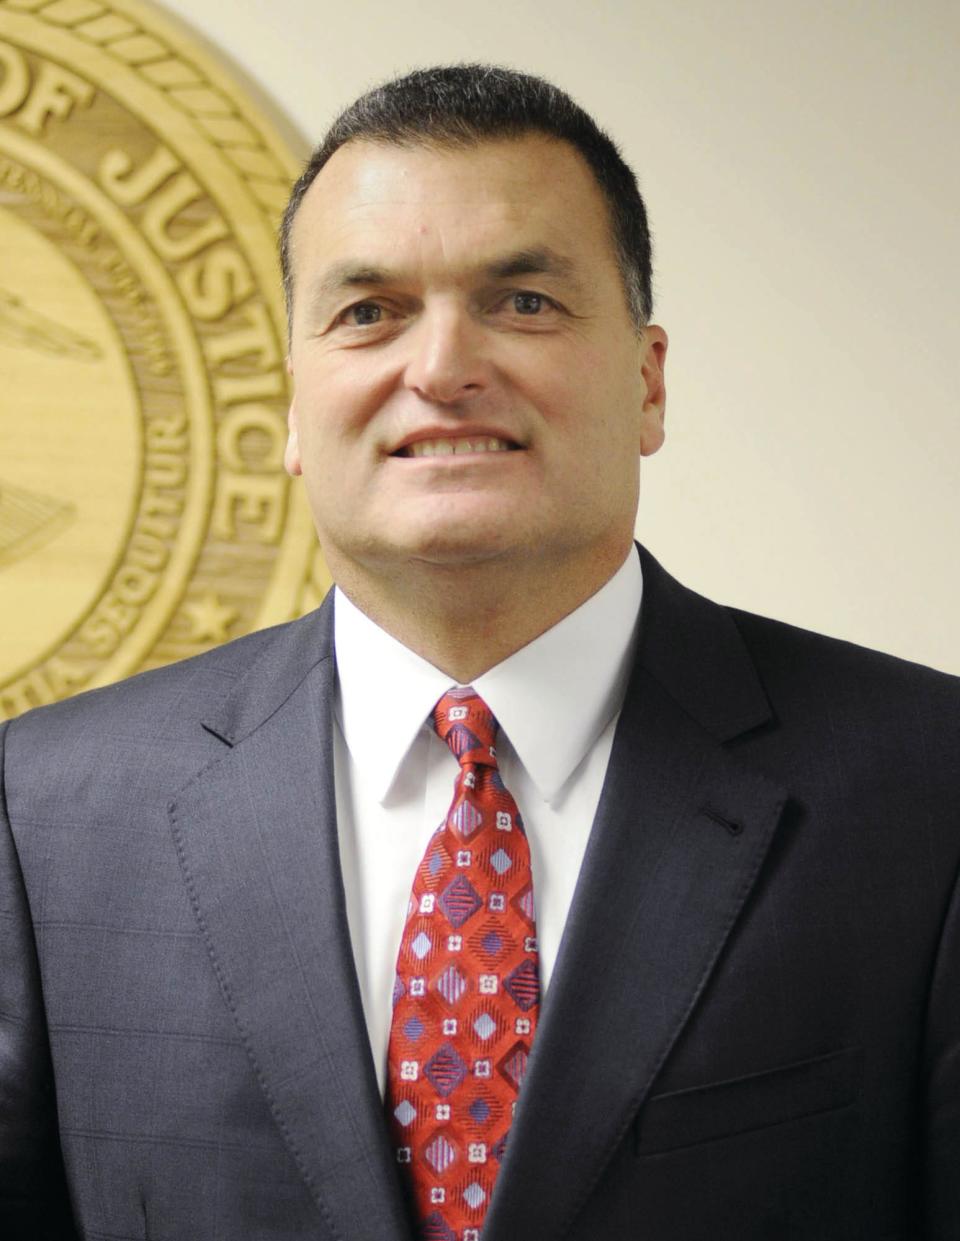 Jerry Clark retired as a special agent with the FBI in 2011, after leading the investigation in the Erie pizza bomber case.